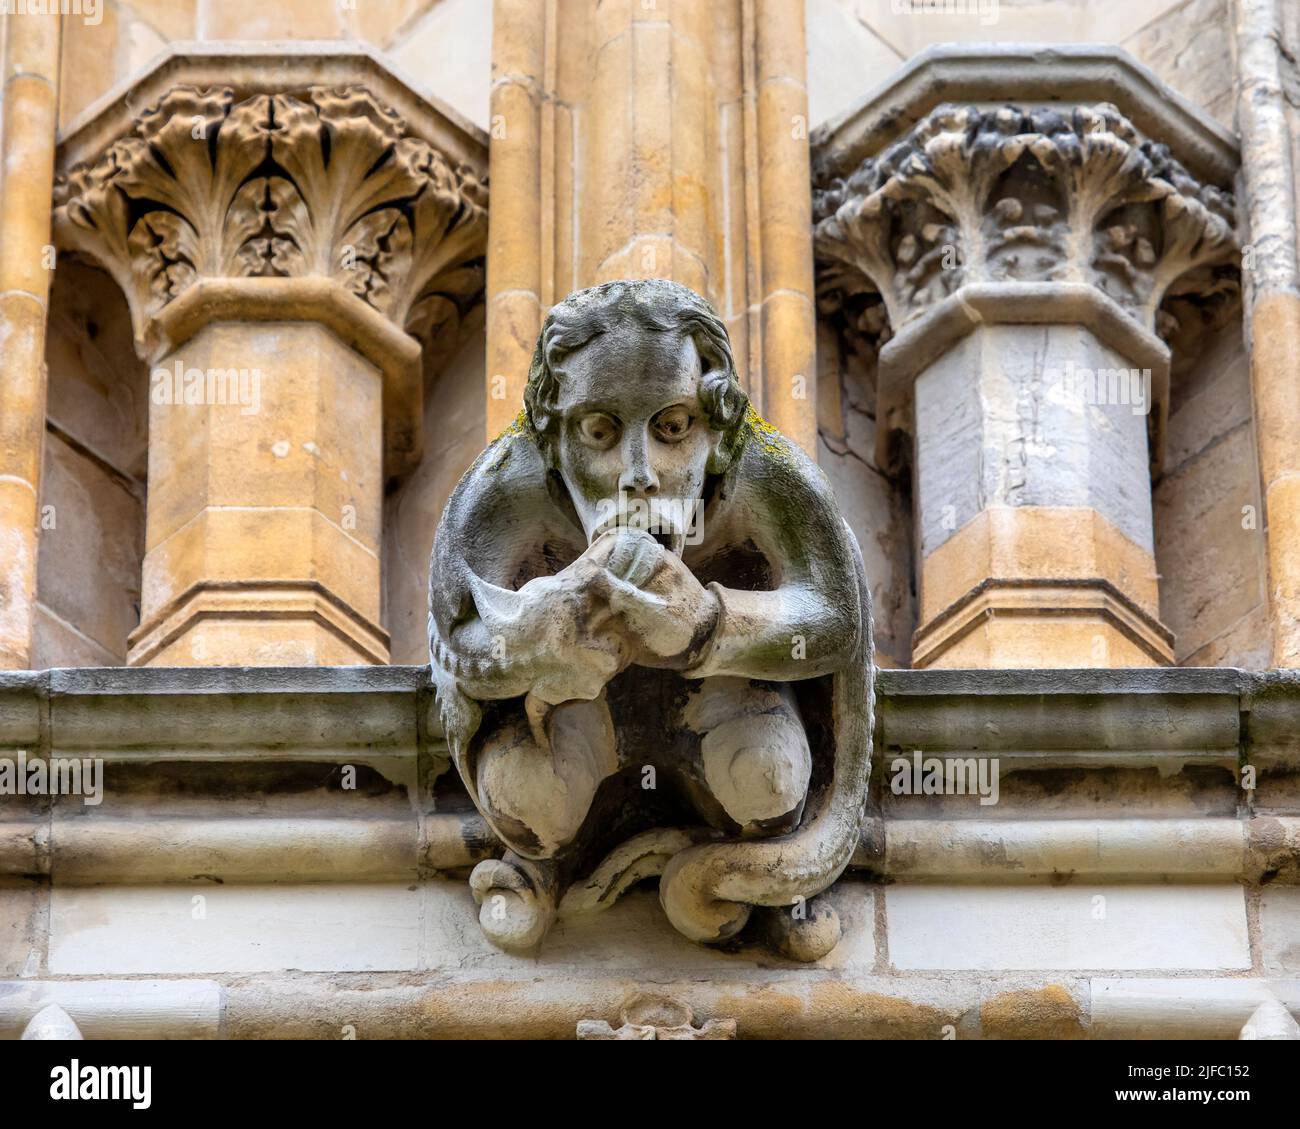 A gargoyle on the exterior of the historic York Minster in the city of York, UK. Stock Photo